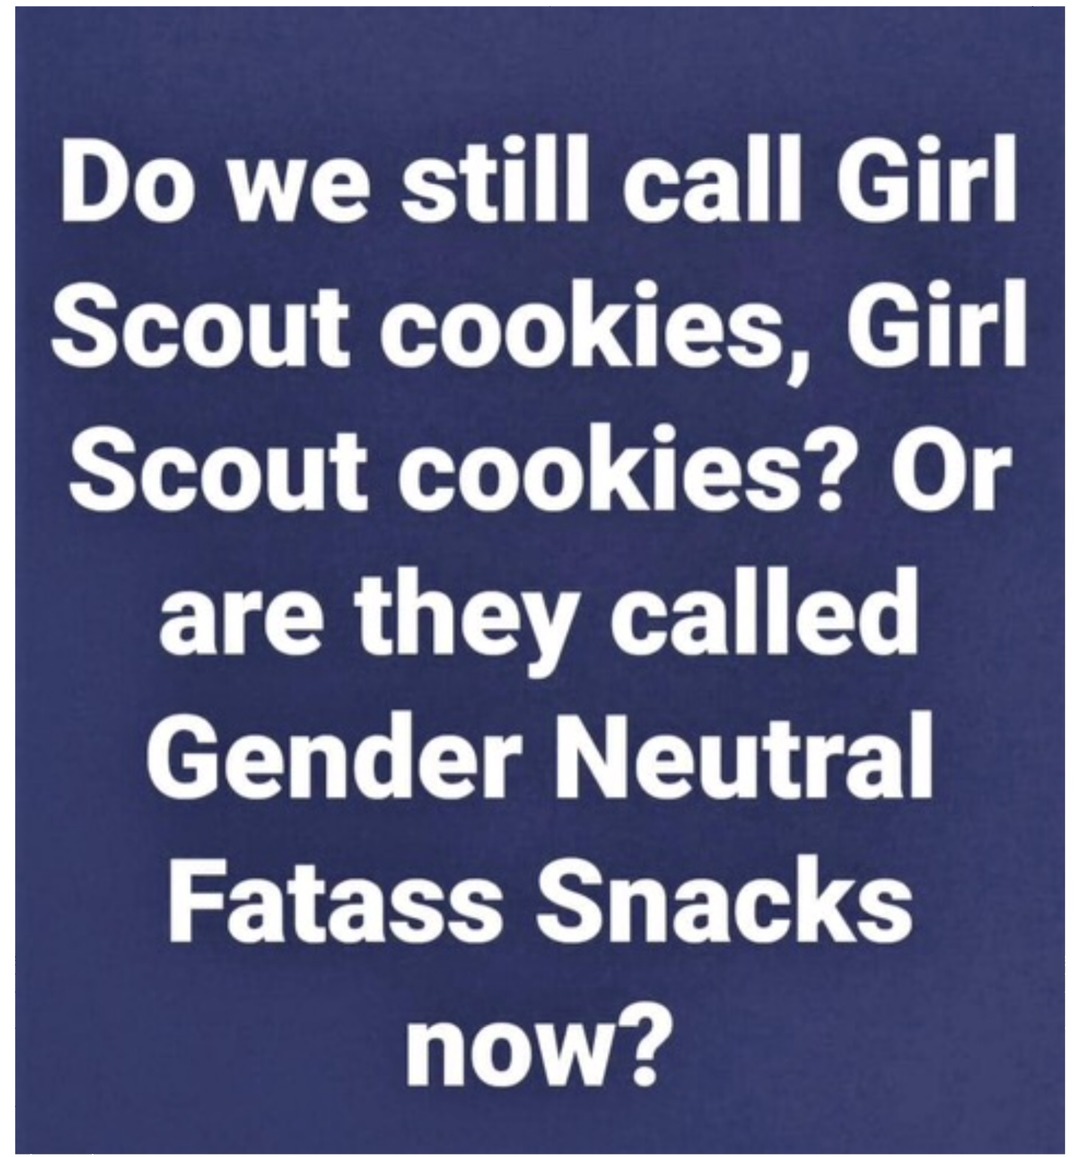 grasshoppers & thin mints, & the coconut ones with carmel - meme